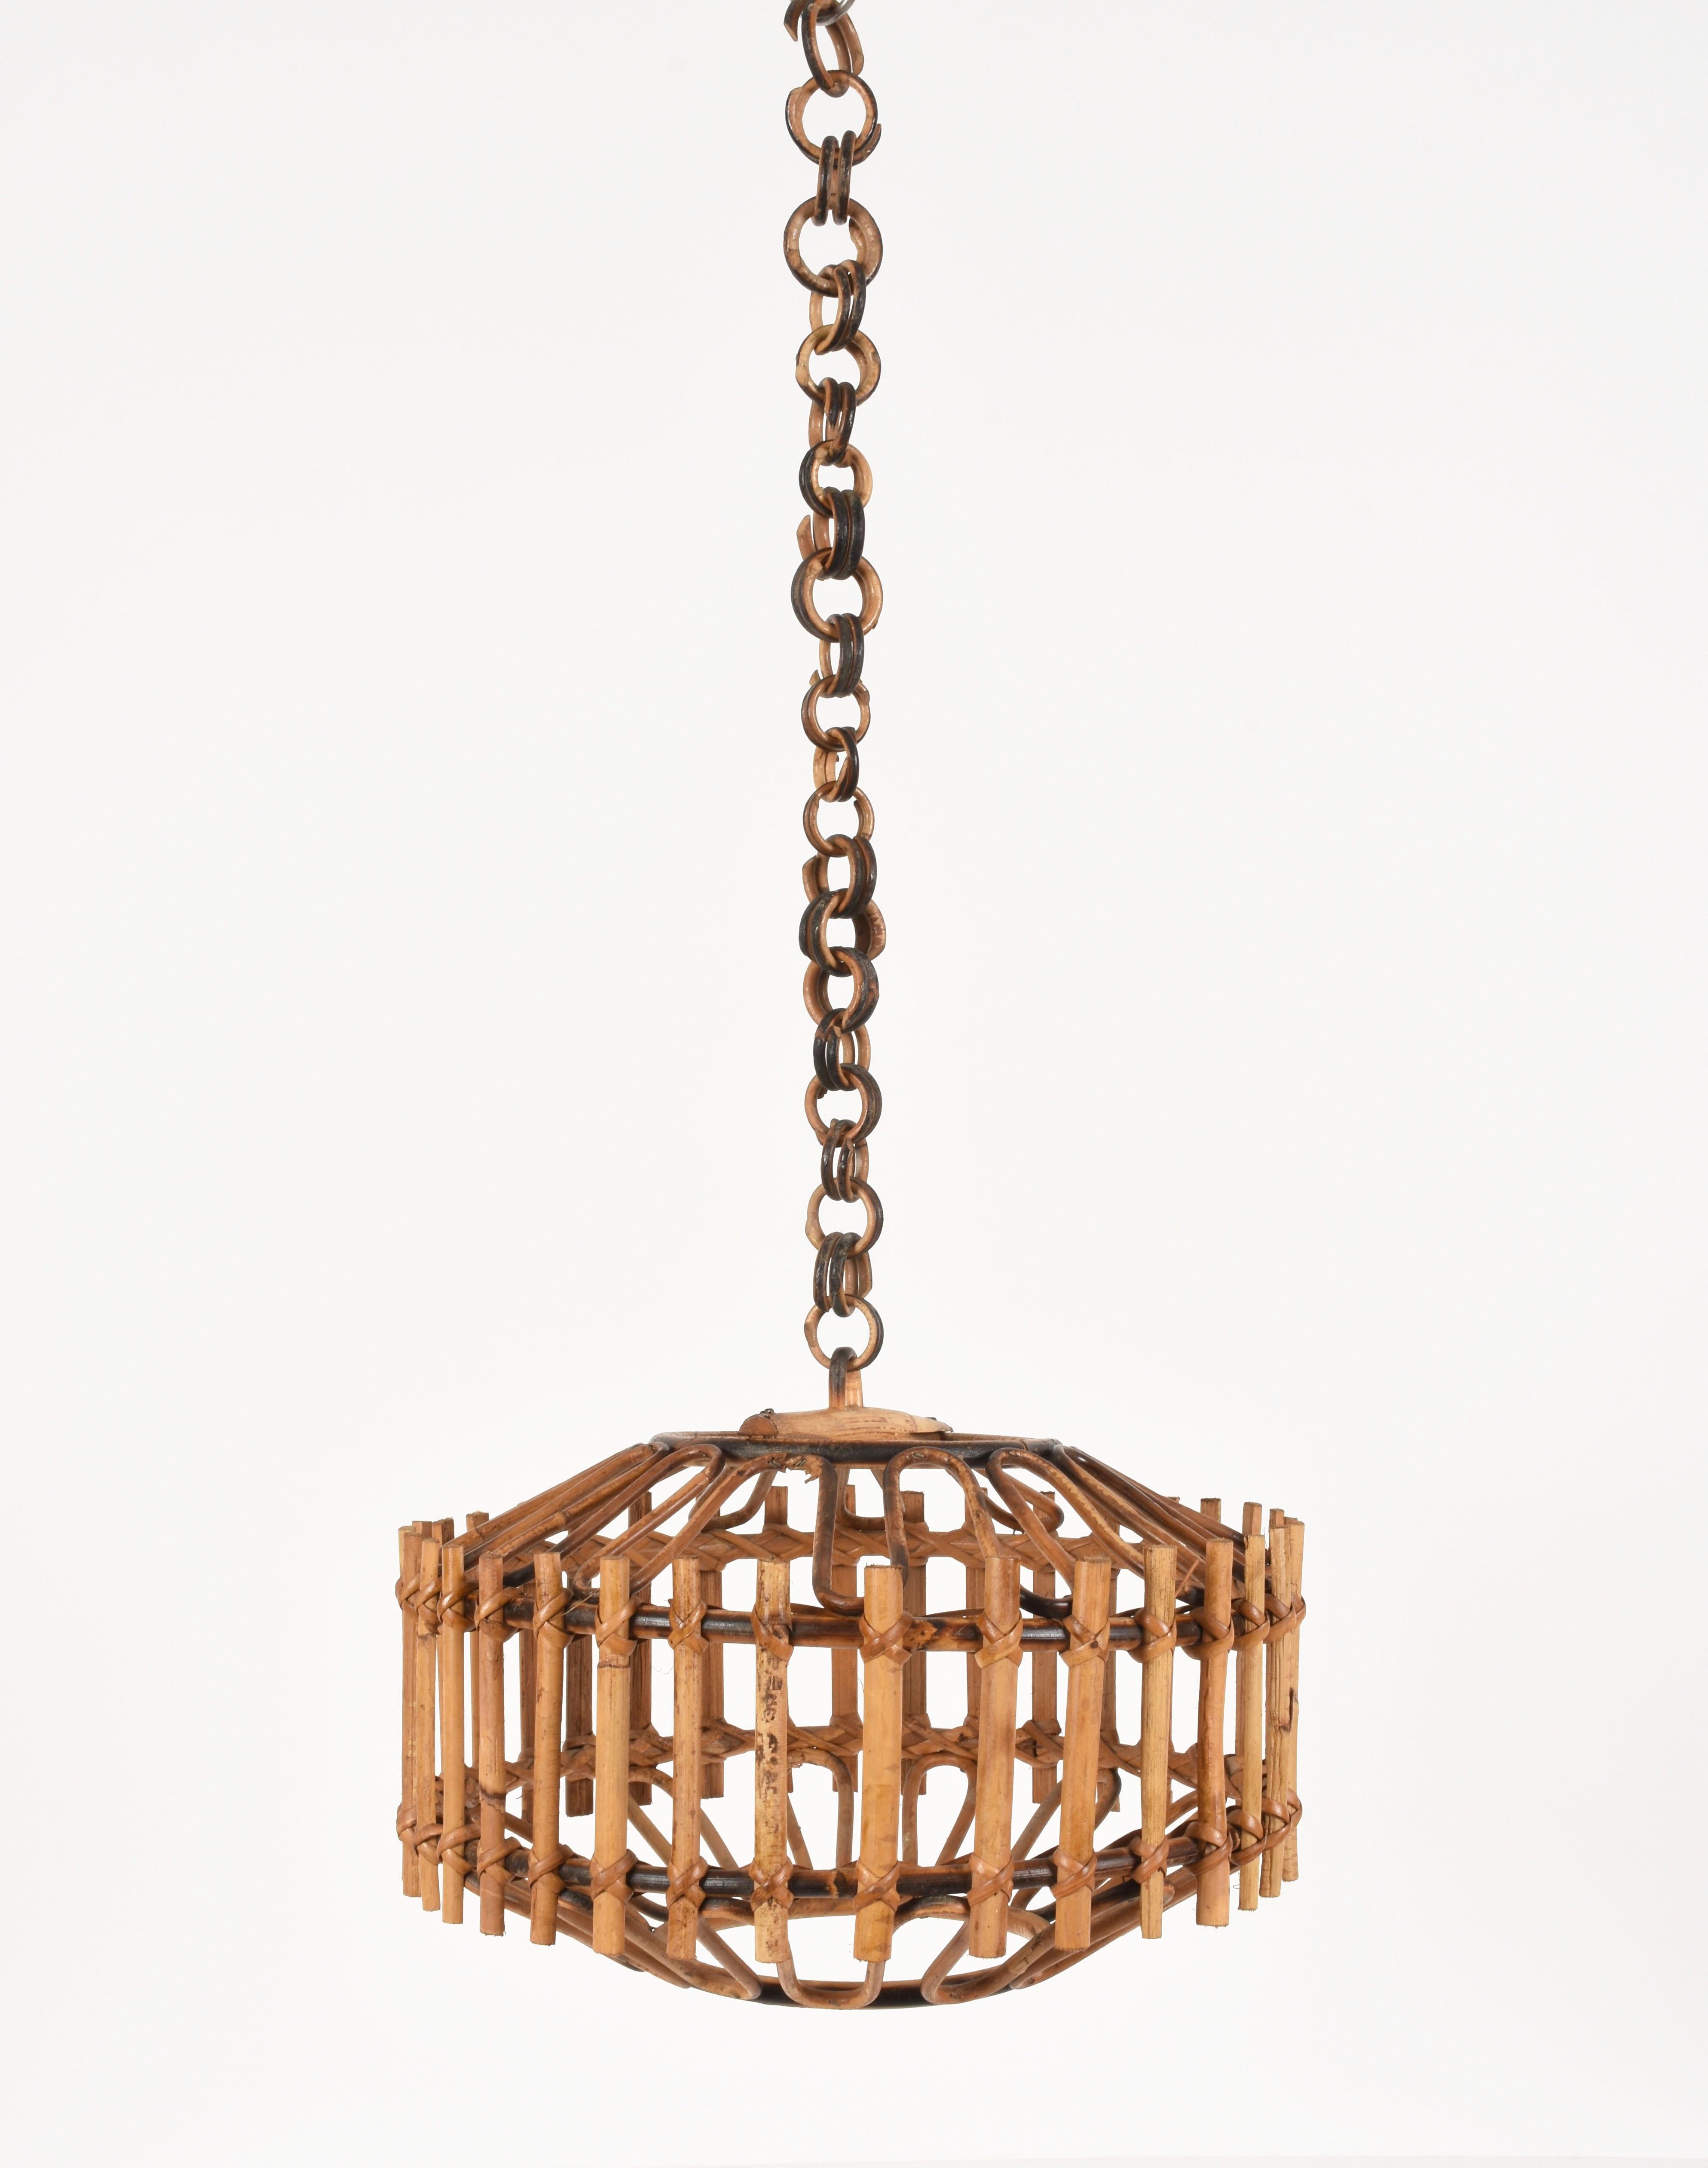 Wonderful bamboo, rattan and wicker pendant circular chandelier in French Riviera style, produced in Italy during the 1960s.

Its design is perfect for who loves the use of rattan to create wonderful masterpieces.

This chandelier is perfect for